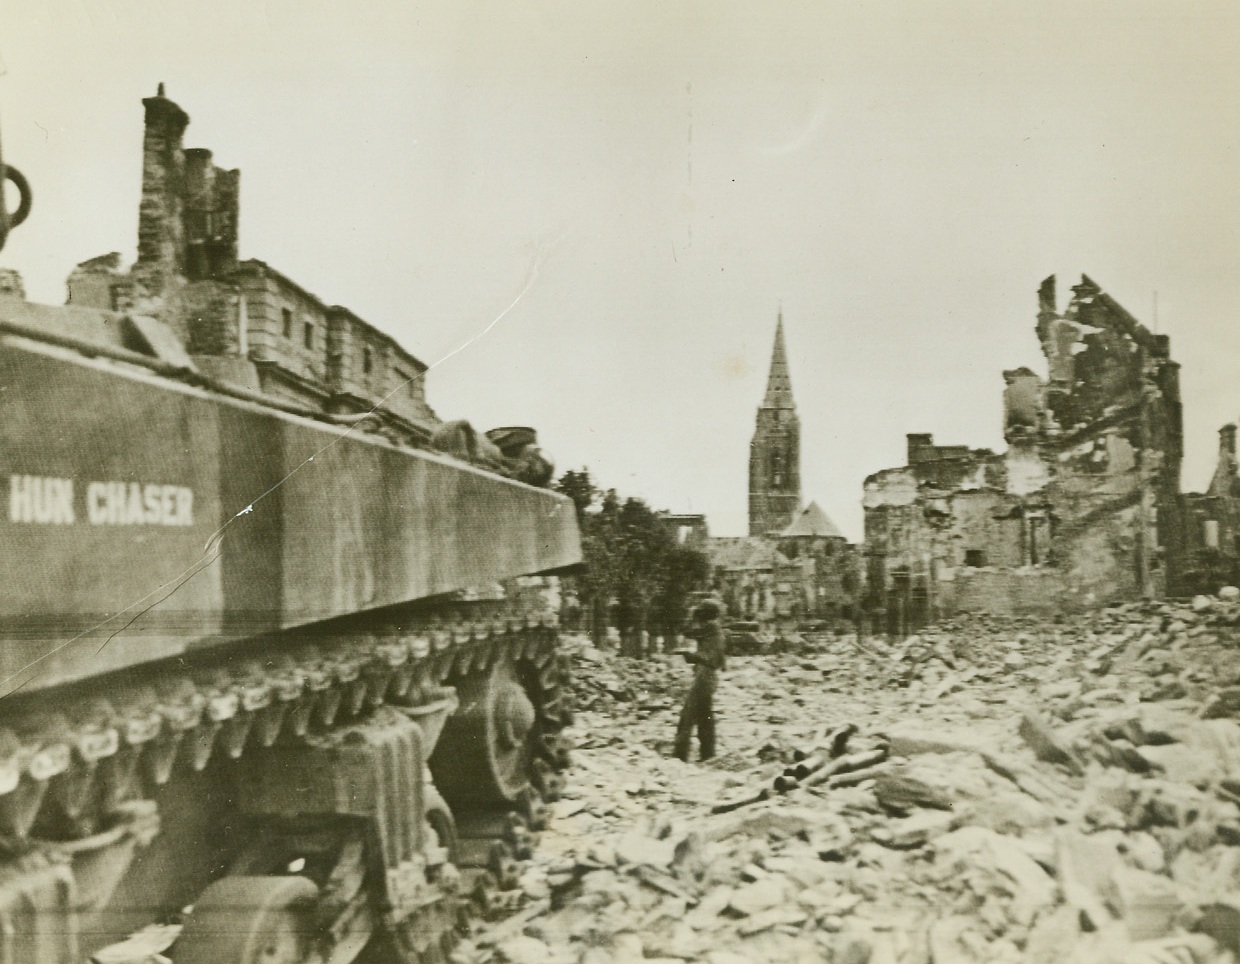 “Hun Chaser” on the March, 7/21/1944. St. Lo, France – While the gigantic “Hun Chaser” tank rumbles through the debris of St. Lo, Pvt. Walter Hatfield, Princeton, Idaho, looks for snipers with field glasses and poised pistol. Blockbusters have not yet cleared the streets of rubble. Credit: US Army Radiotelephoto from ACME;